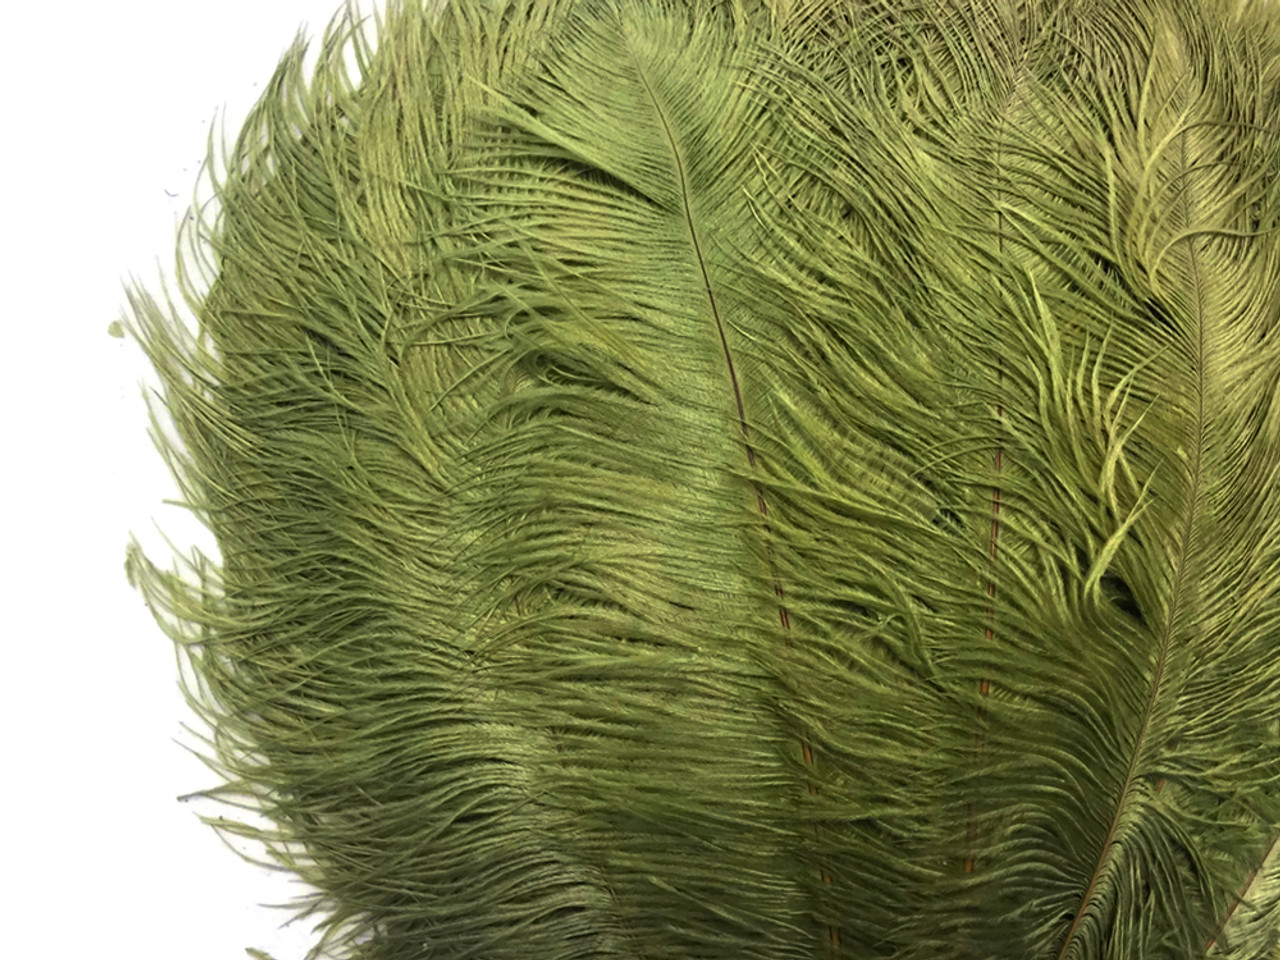 1/2 lb. - 14-17 Olive Green Ostrich Large Body Drab Wholesale Feathers  (Bulk)